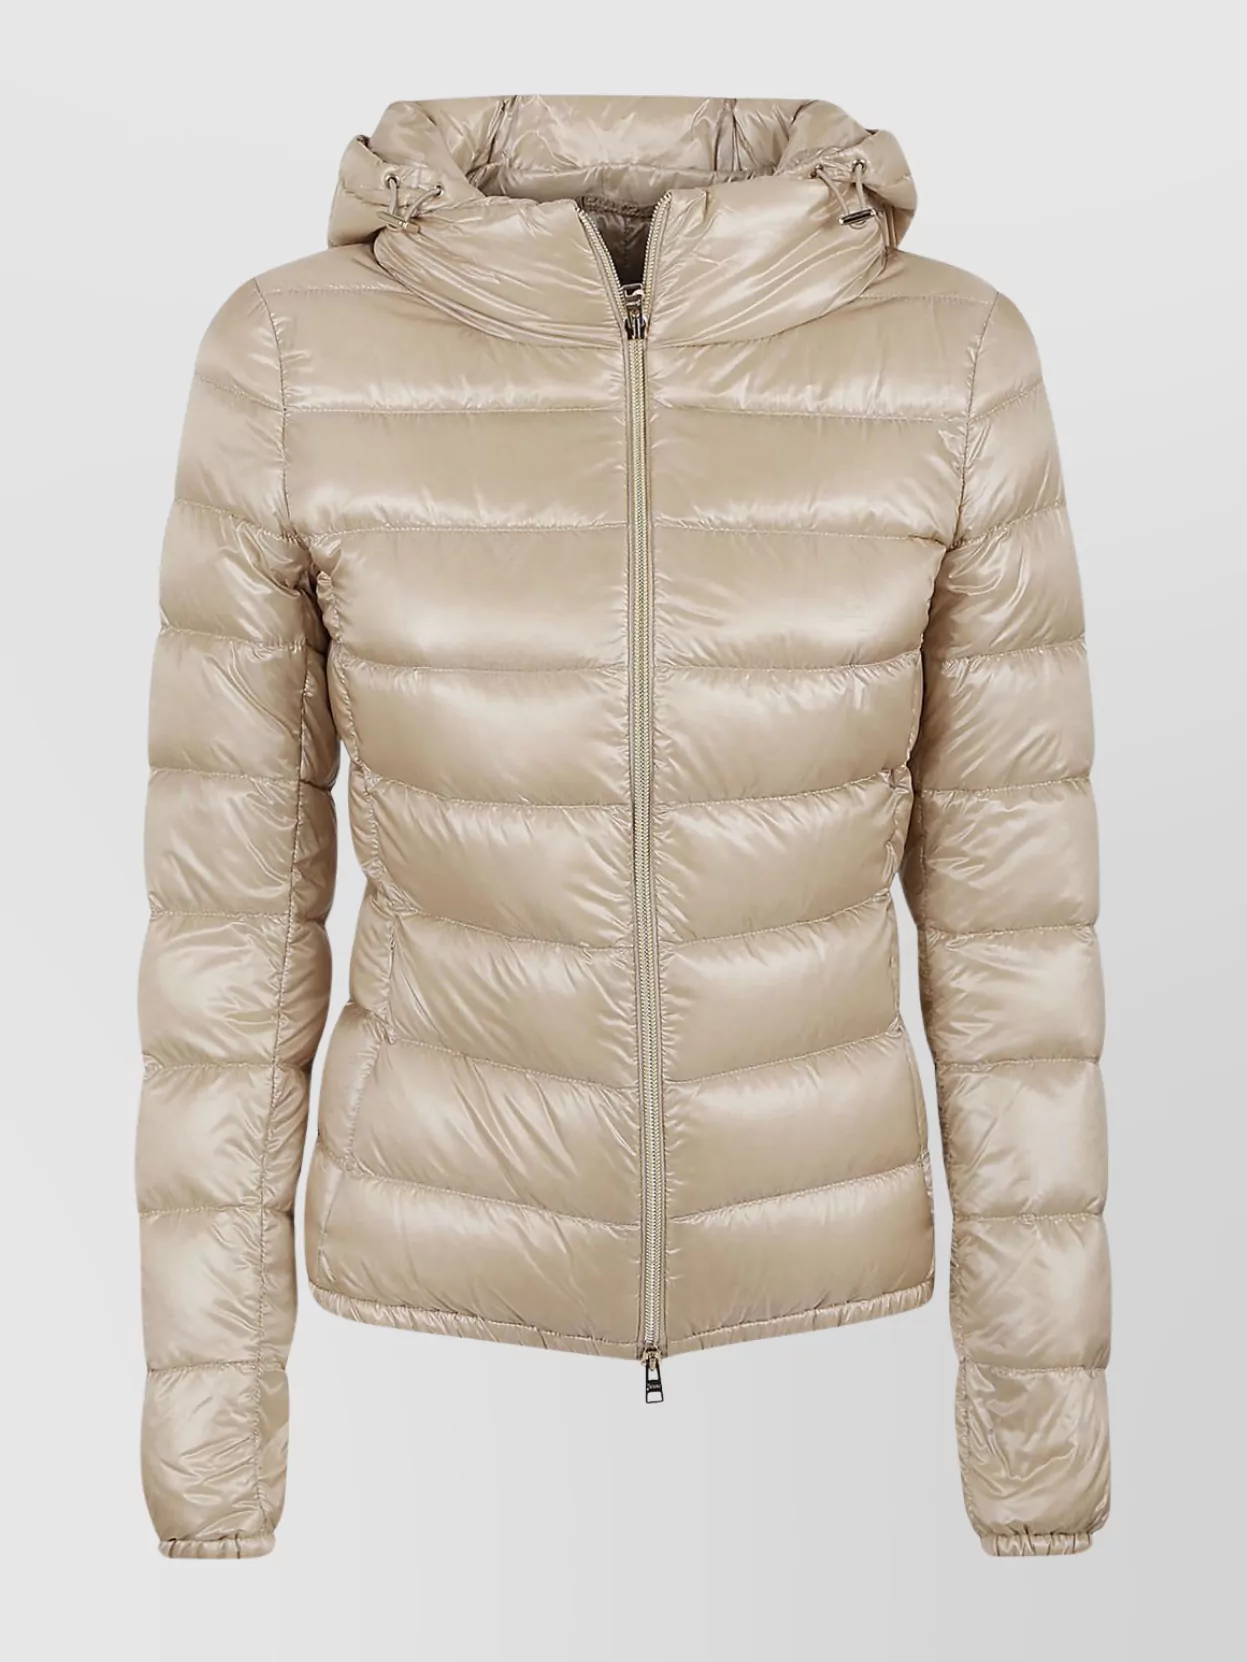 Herno Nylon Bomber With Hood And Pockets In Cream